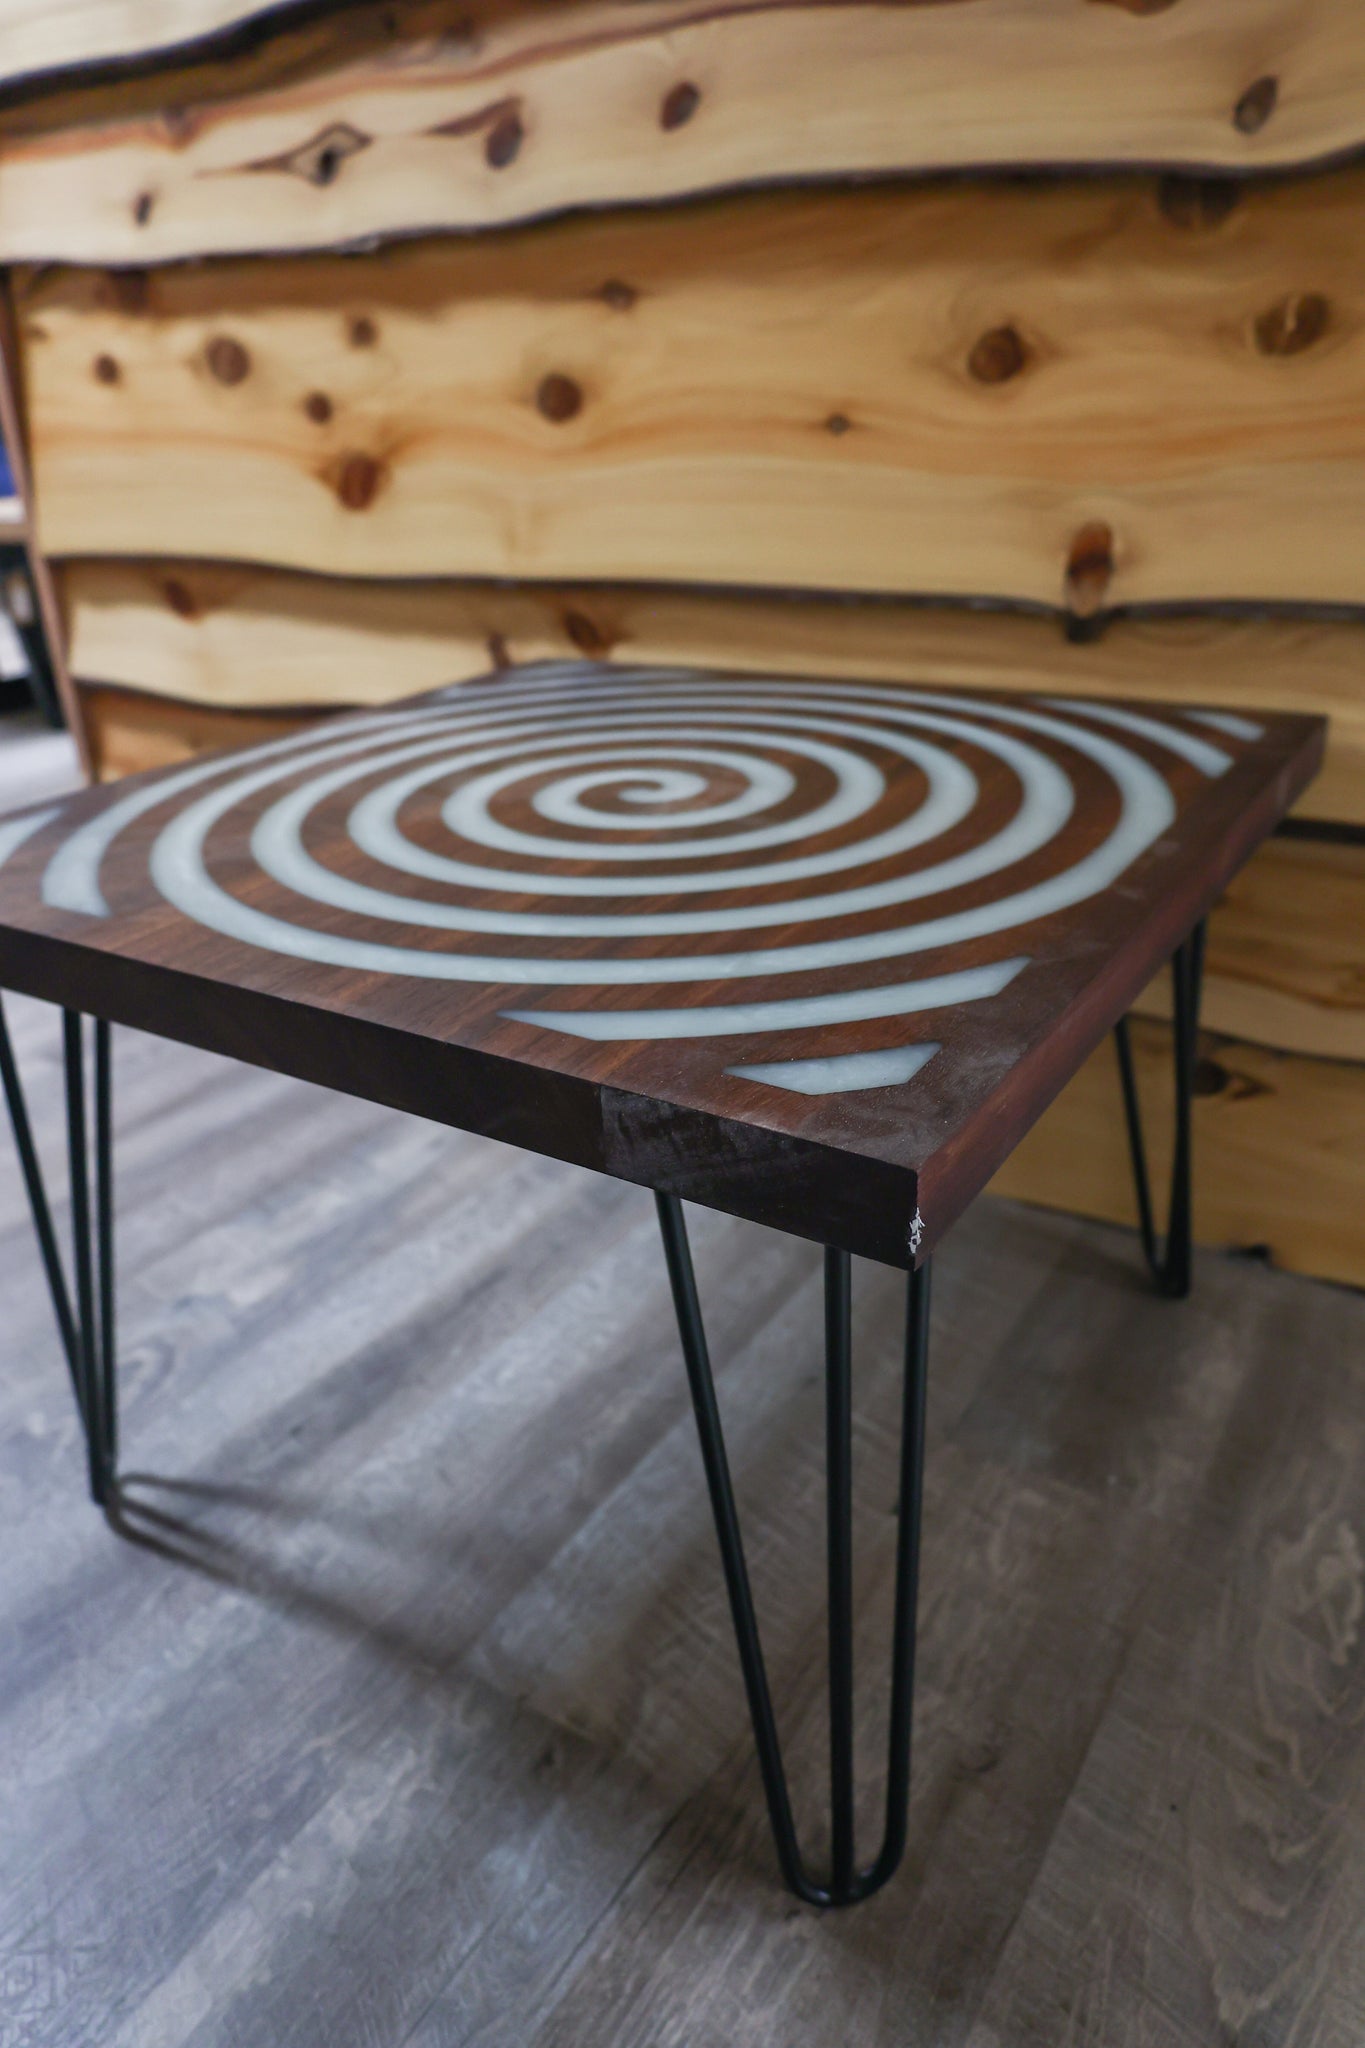 Paduch Spiral Table with Black Hair Pin Legs - #93